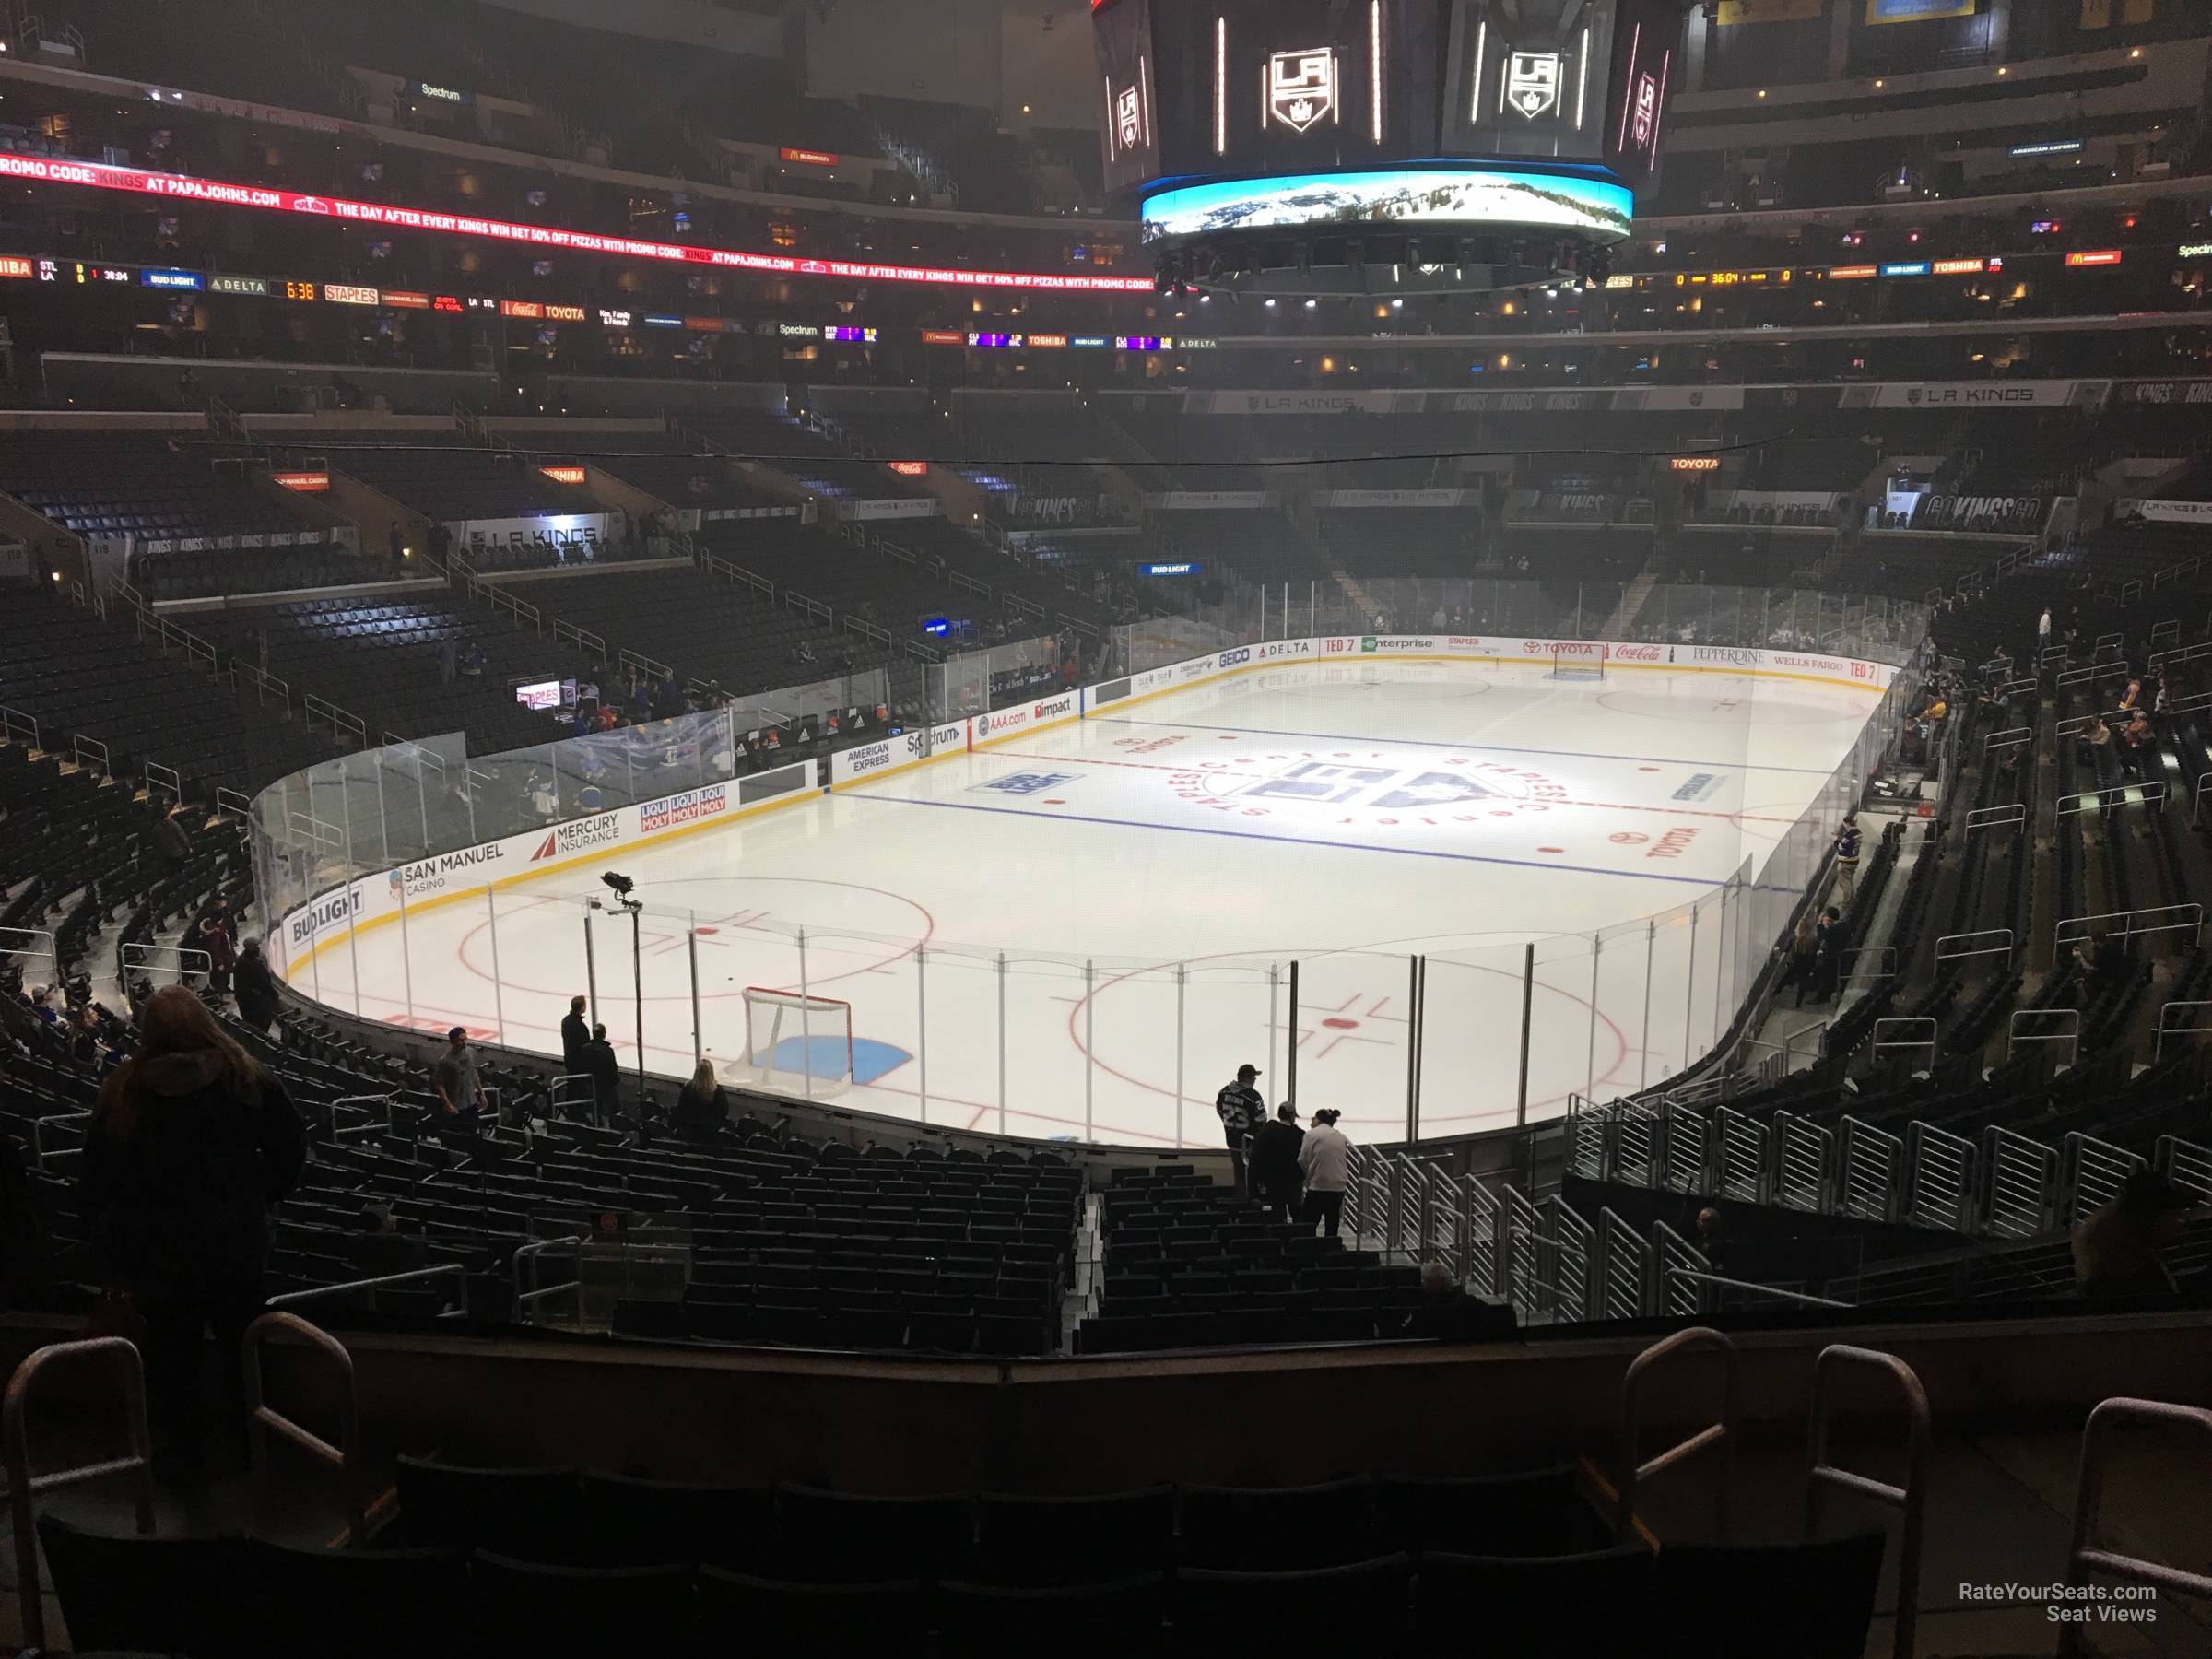 section 215, row 6 seat view  for hockey - crypto.com arena